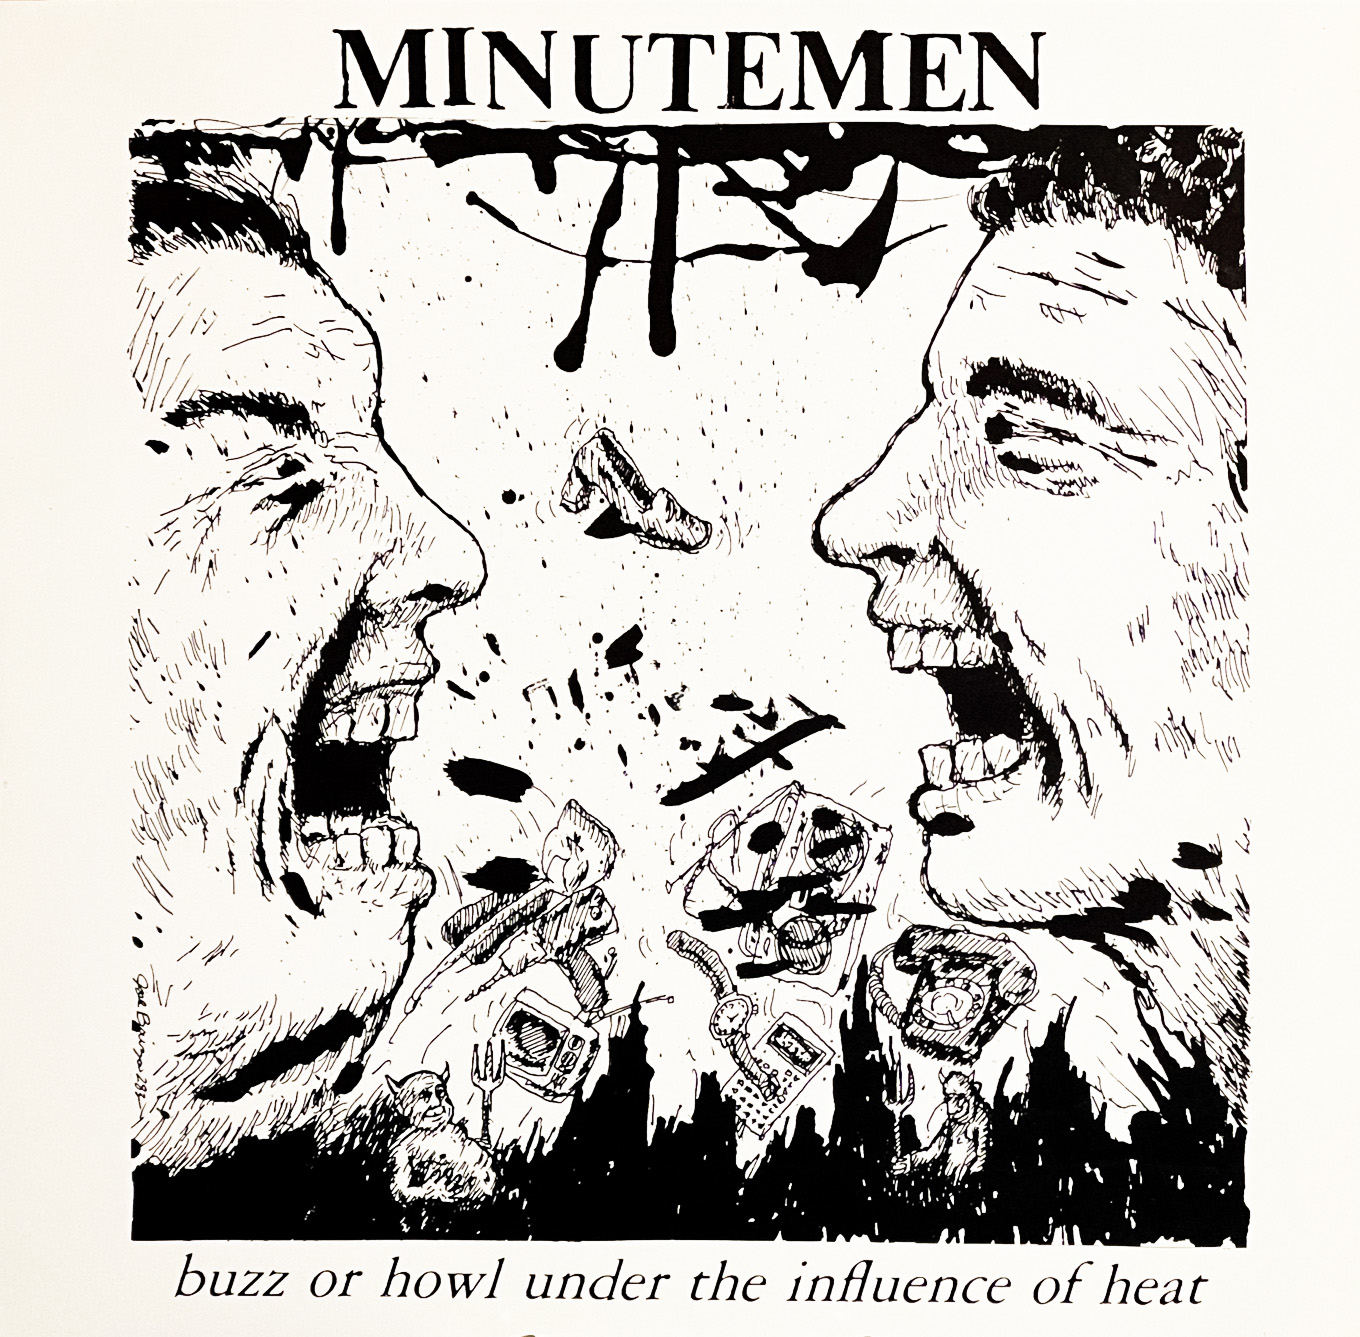 The Daily Orca-All My Records-Minutemen “Buzz or Howl Under the Influence of Heat”